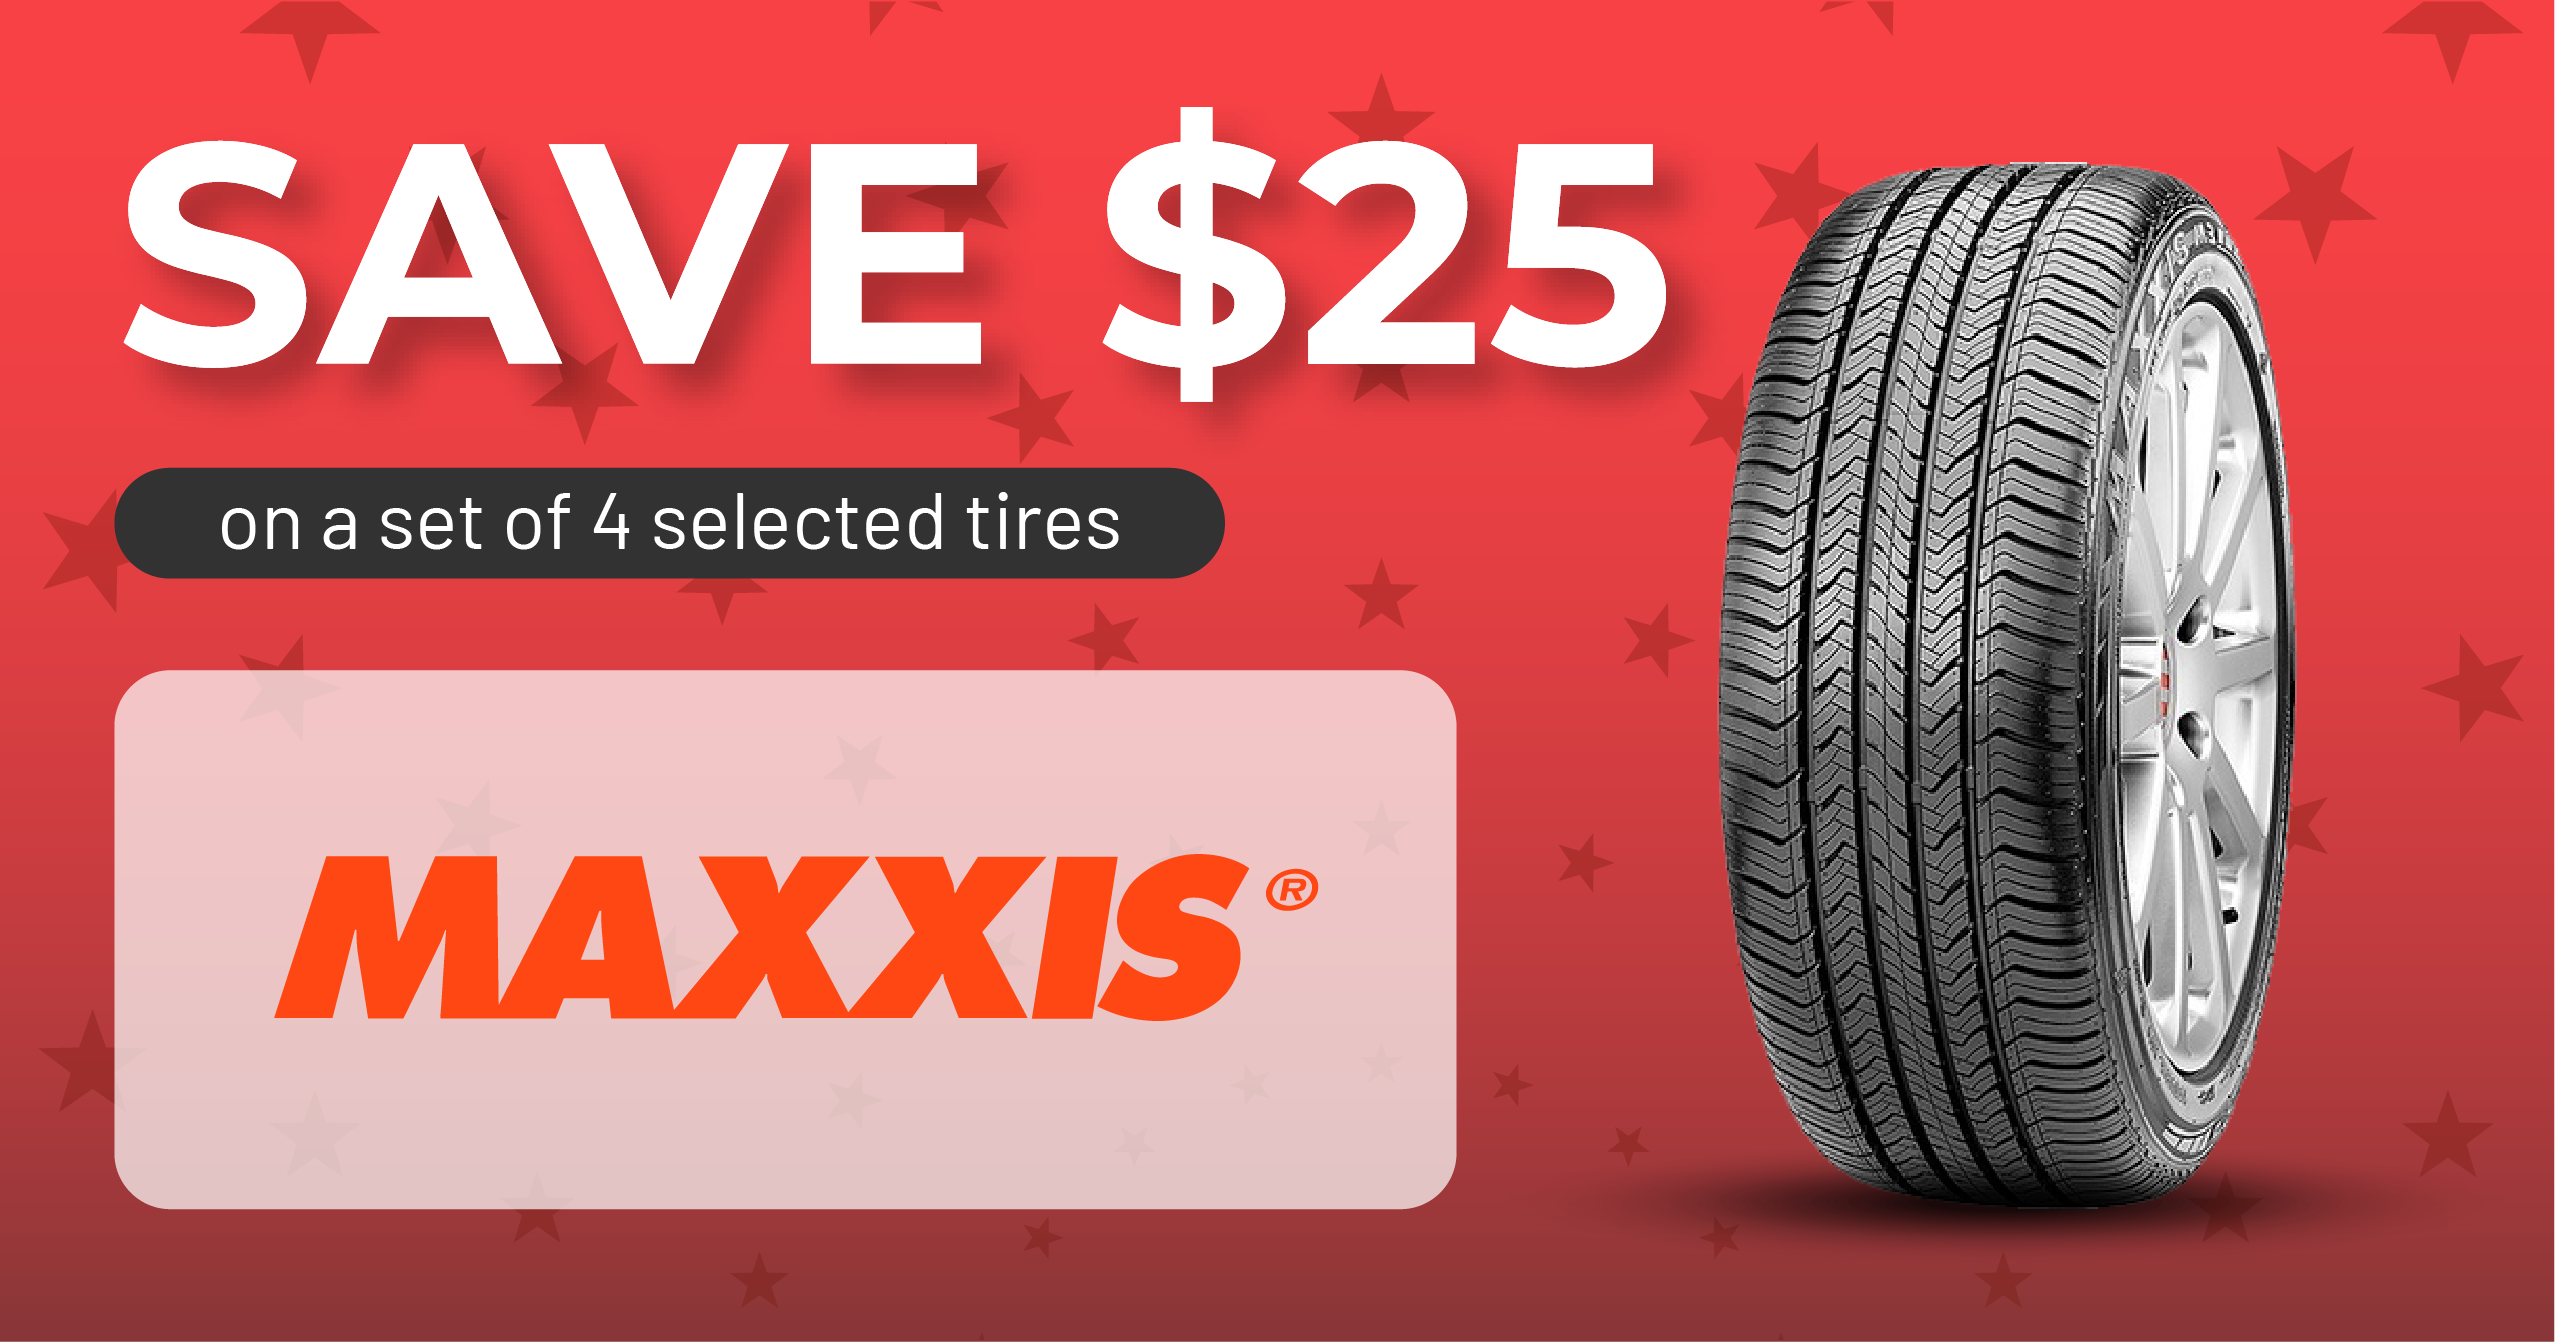 Maxxis save $25 image